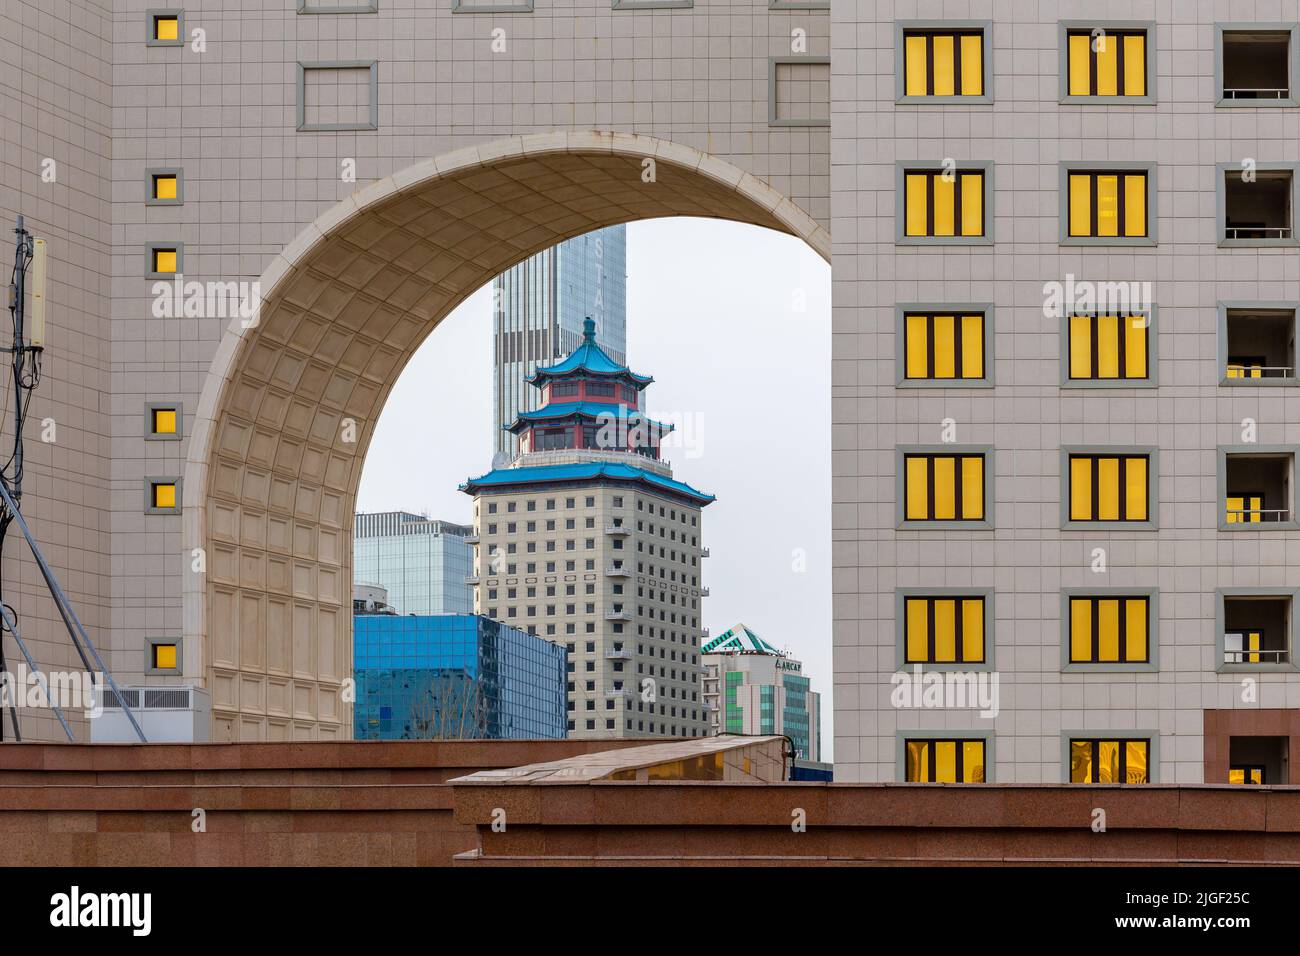 Nur Sultan (Astana), Kazakhstan, 11.11.21. Beijing Palace Soluxe Hotel Astana building with traditional Chinese blue roof seen through an arch in gold Stock Photo